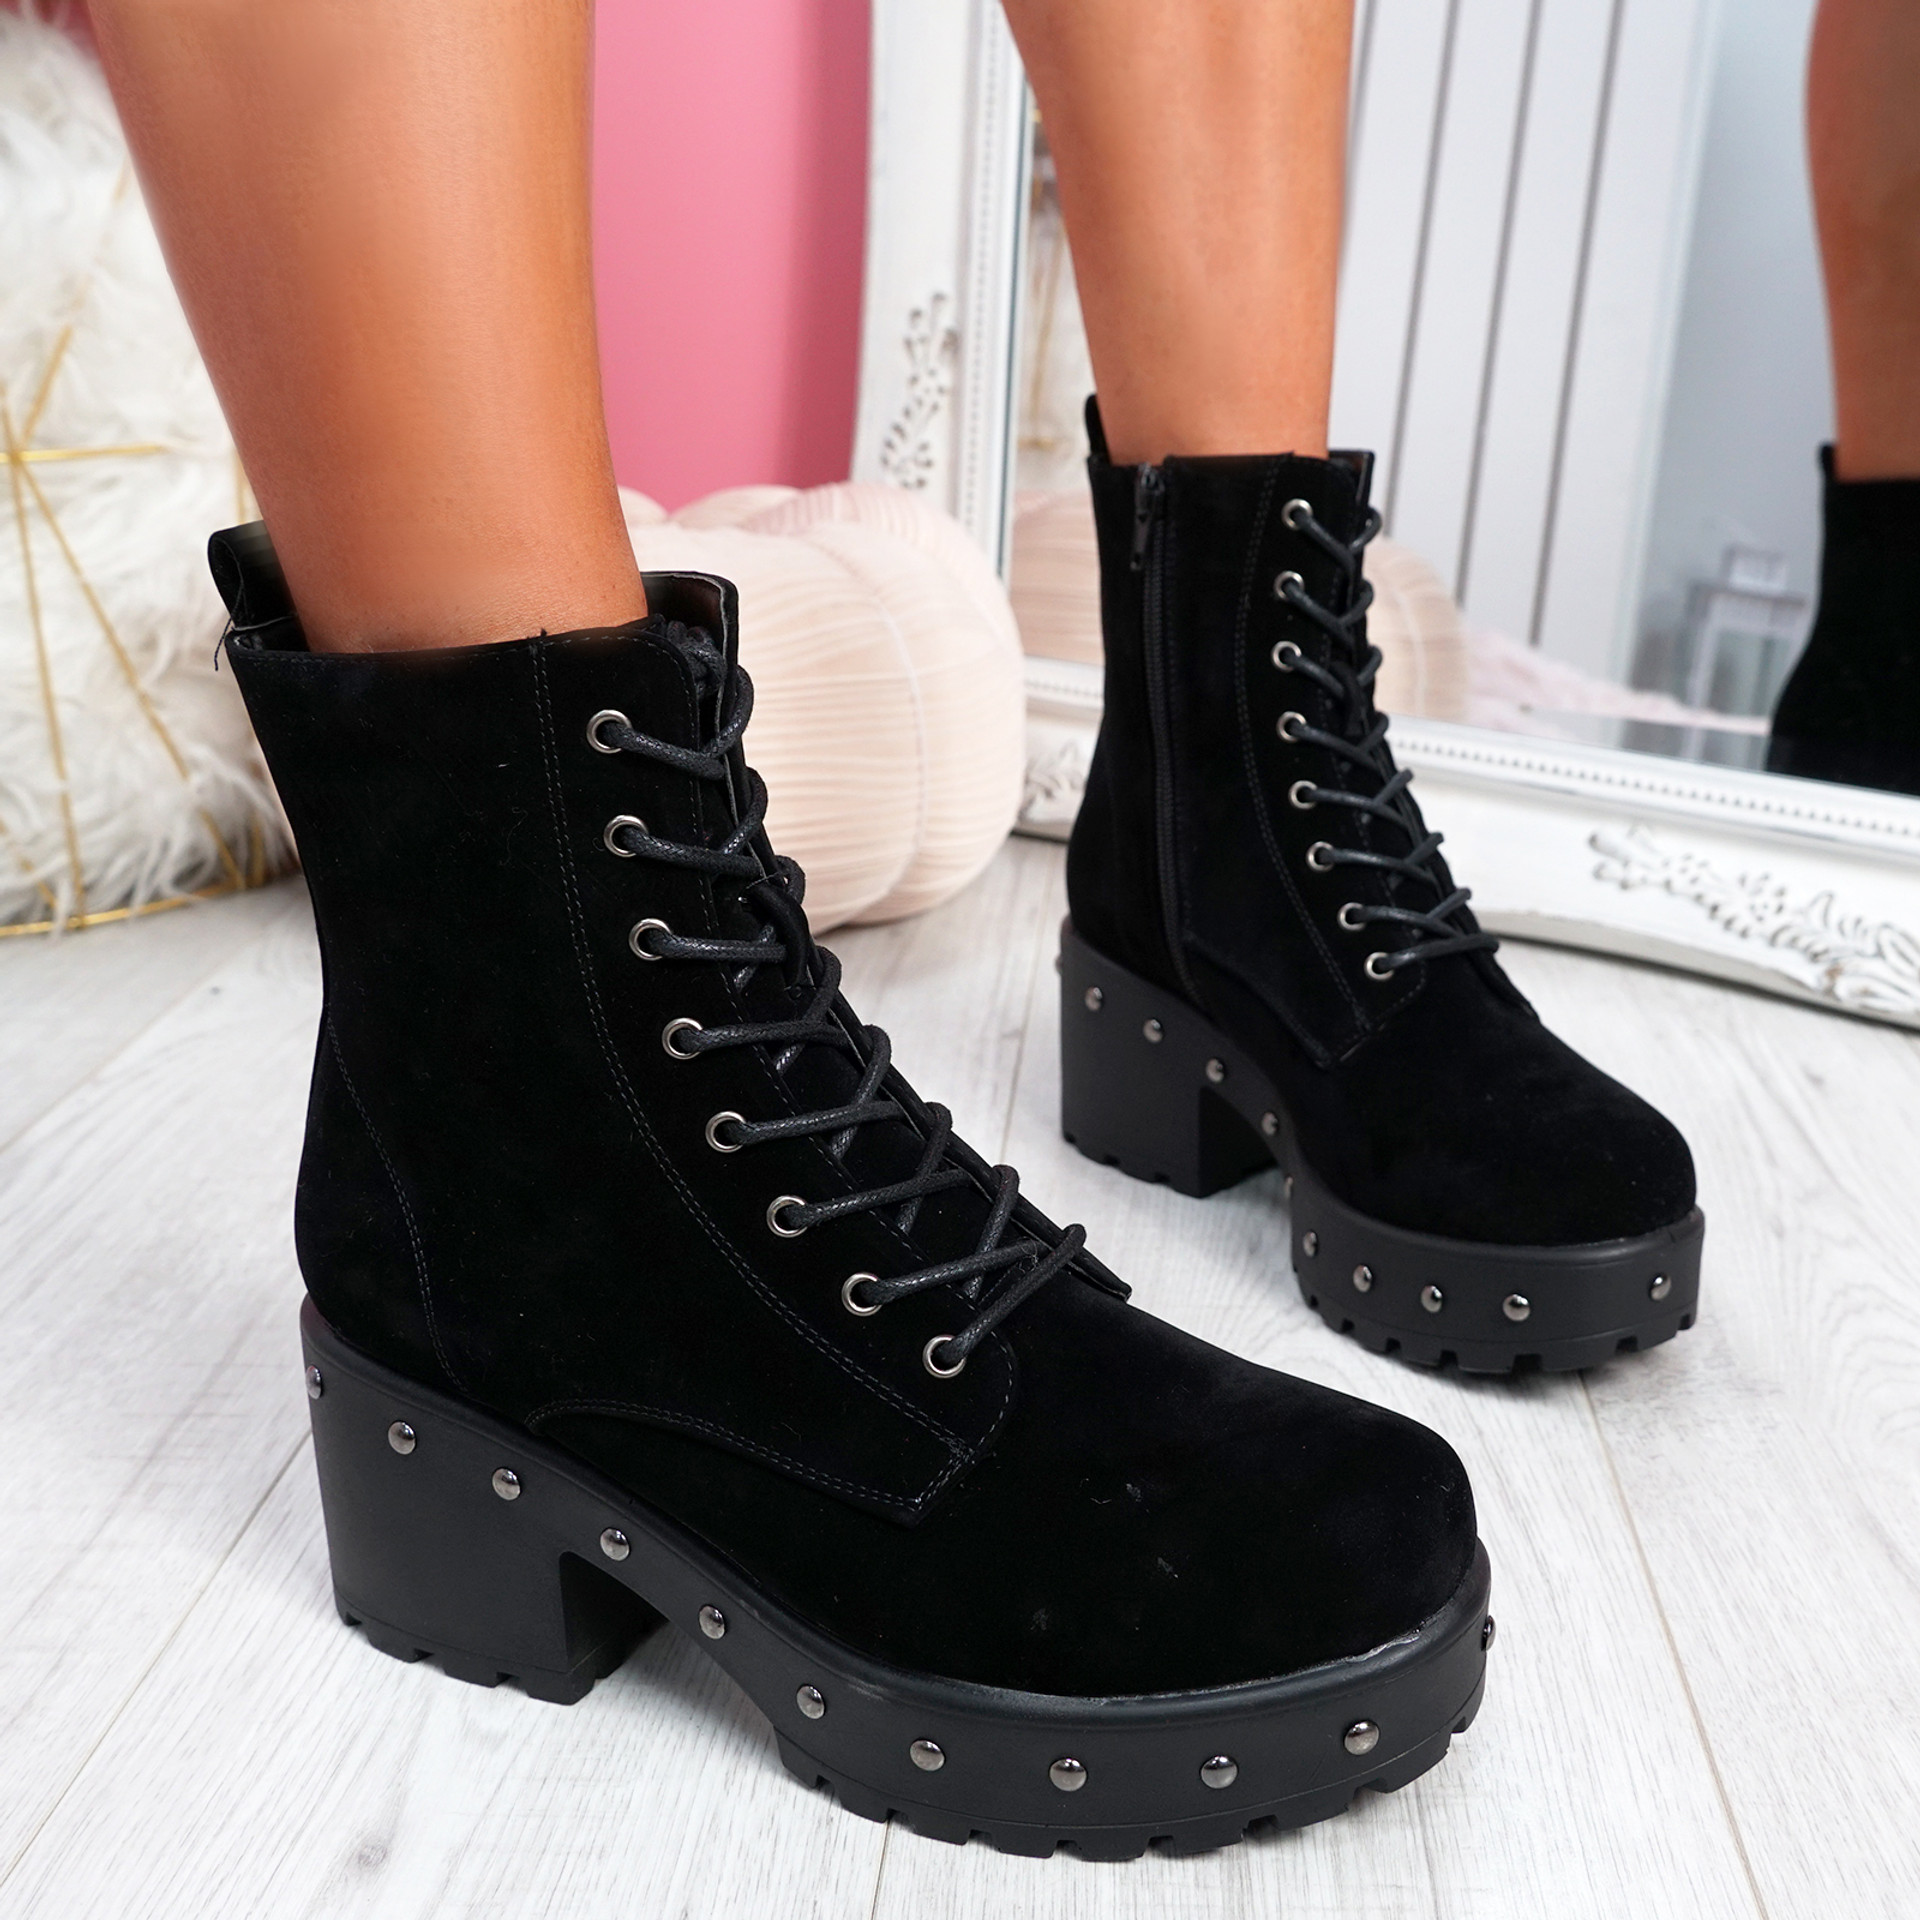 Dyzze Black Suede Studded Ankle Boots